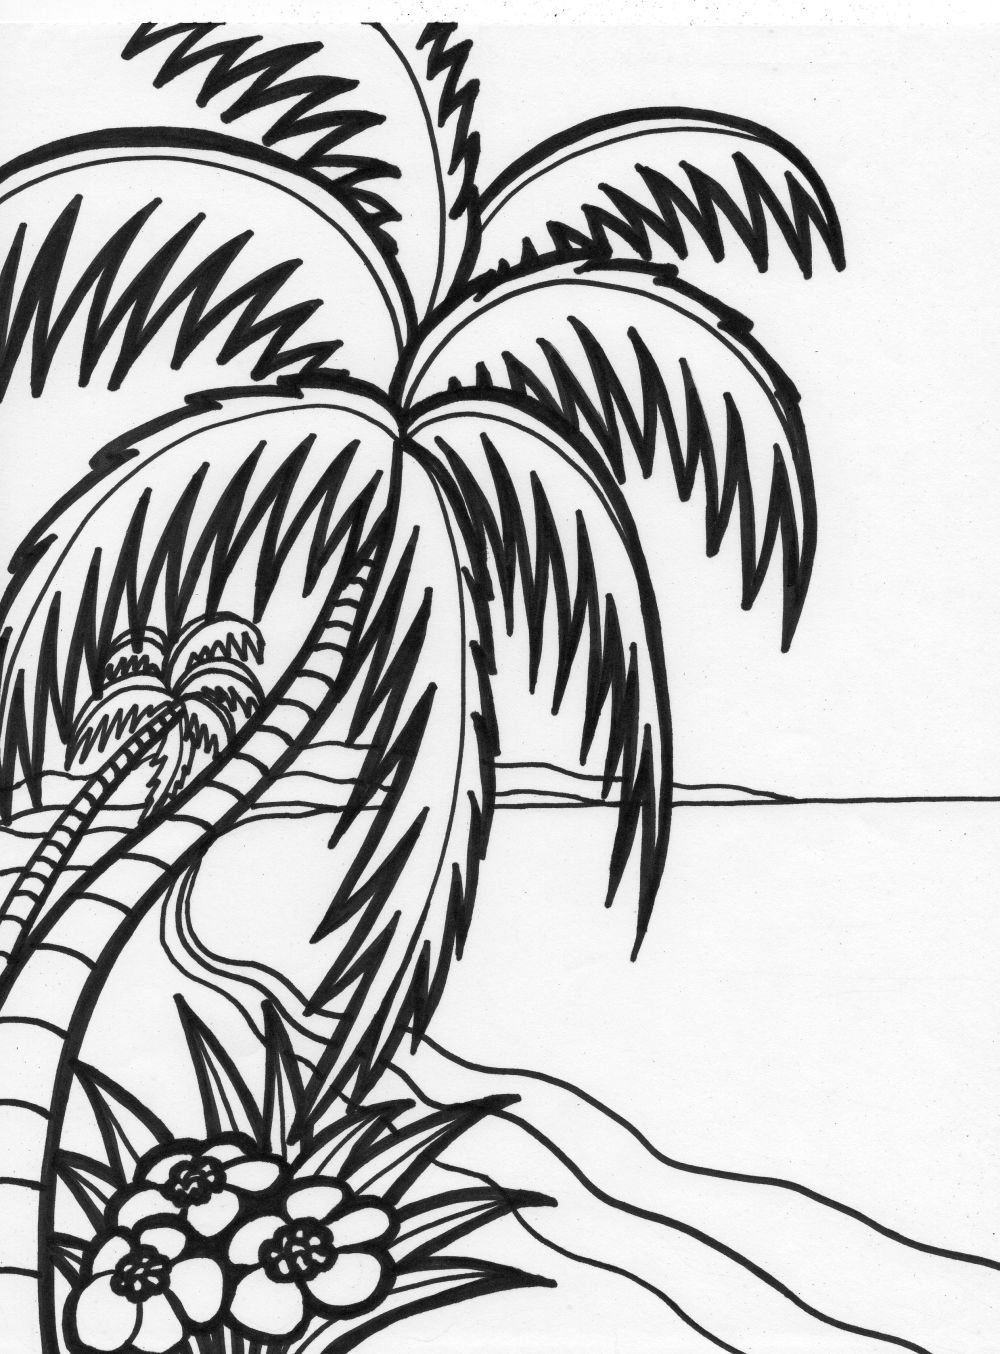 Coloring Pages Of Hawaii Beaches - Coloring Page